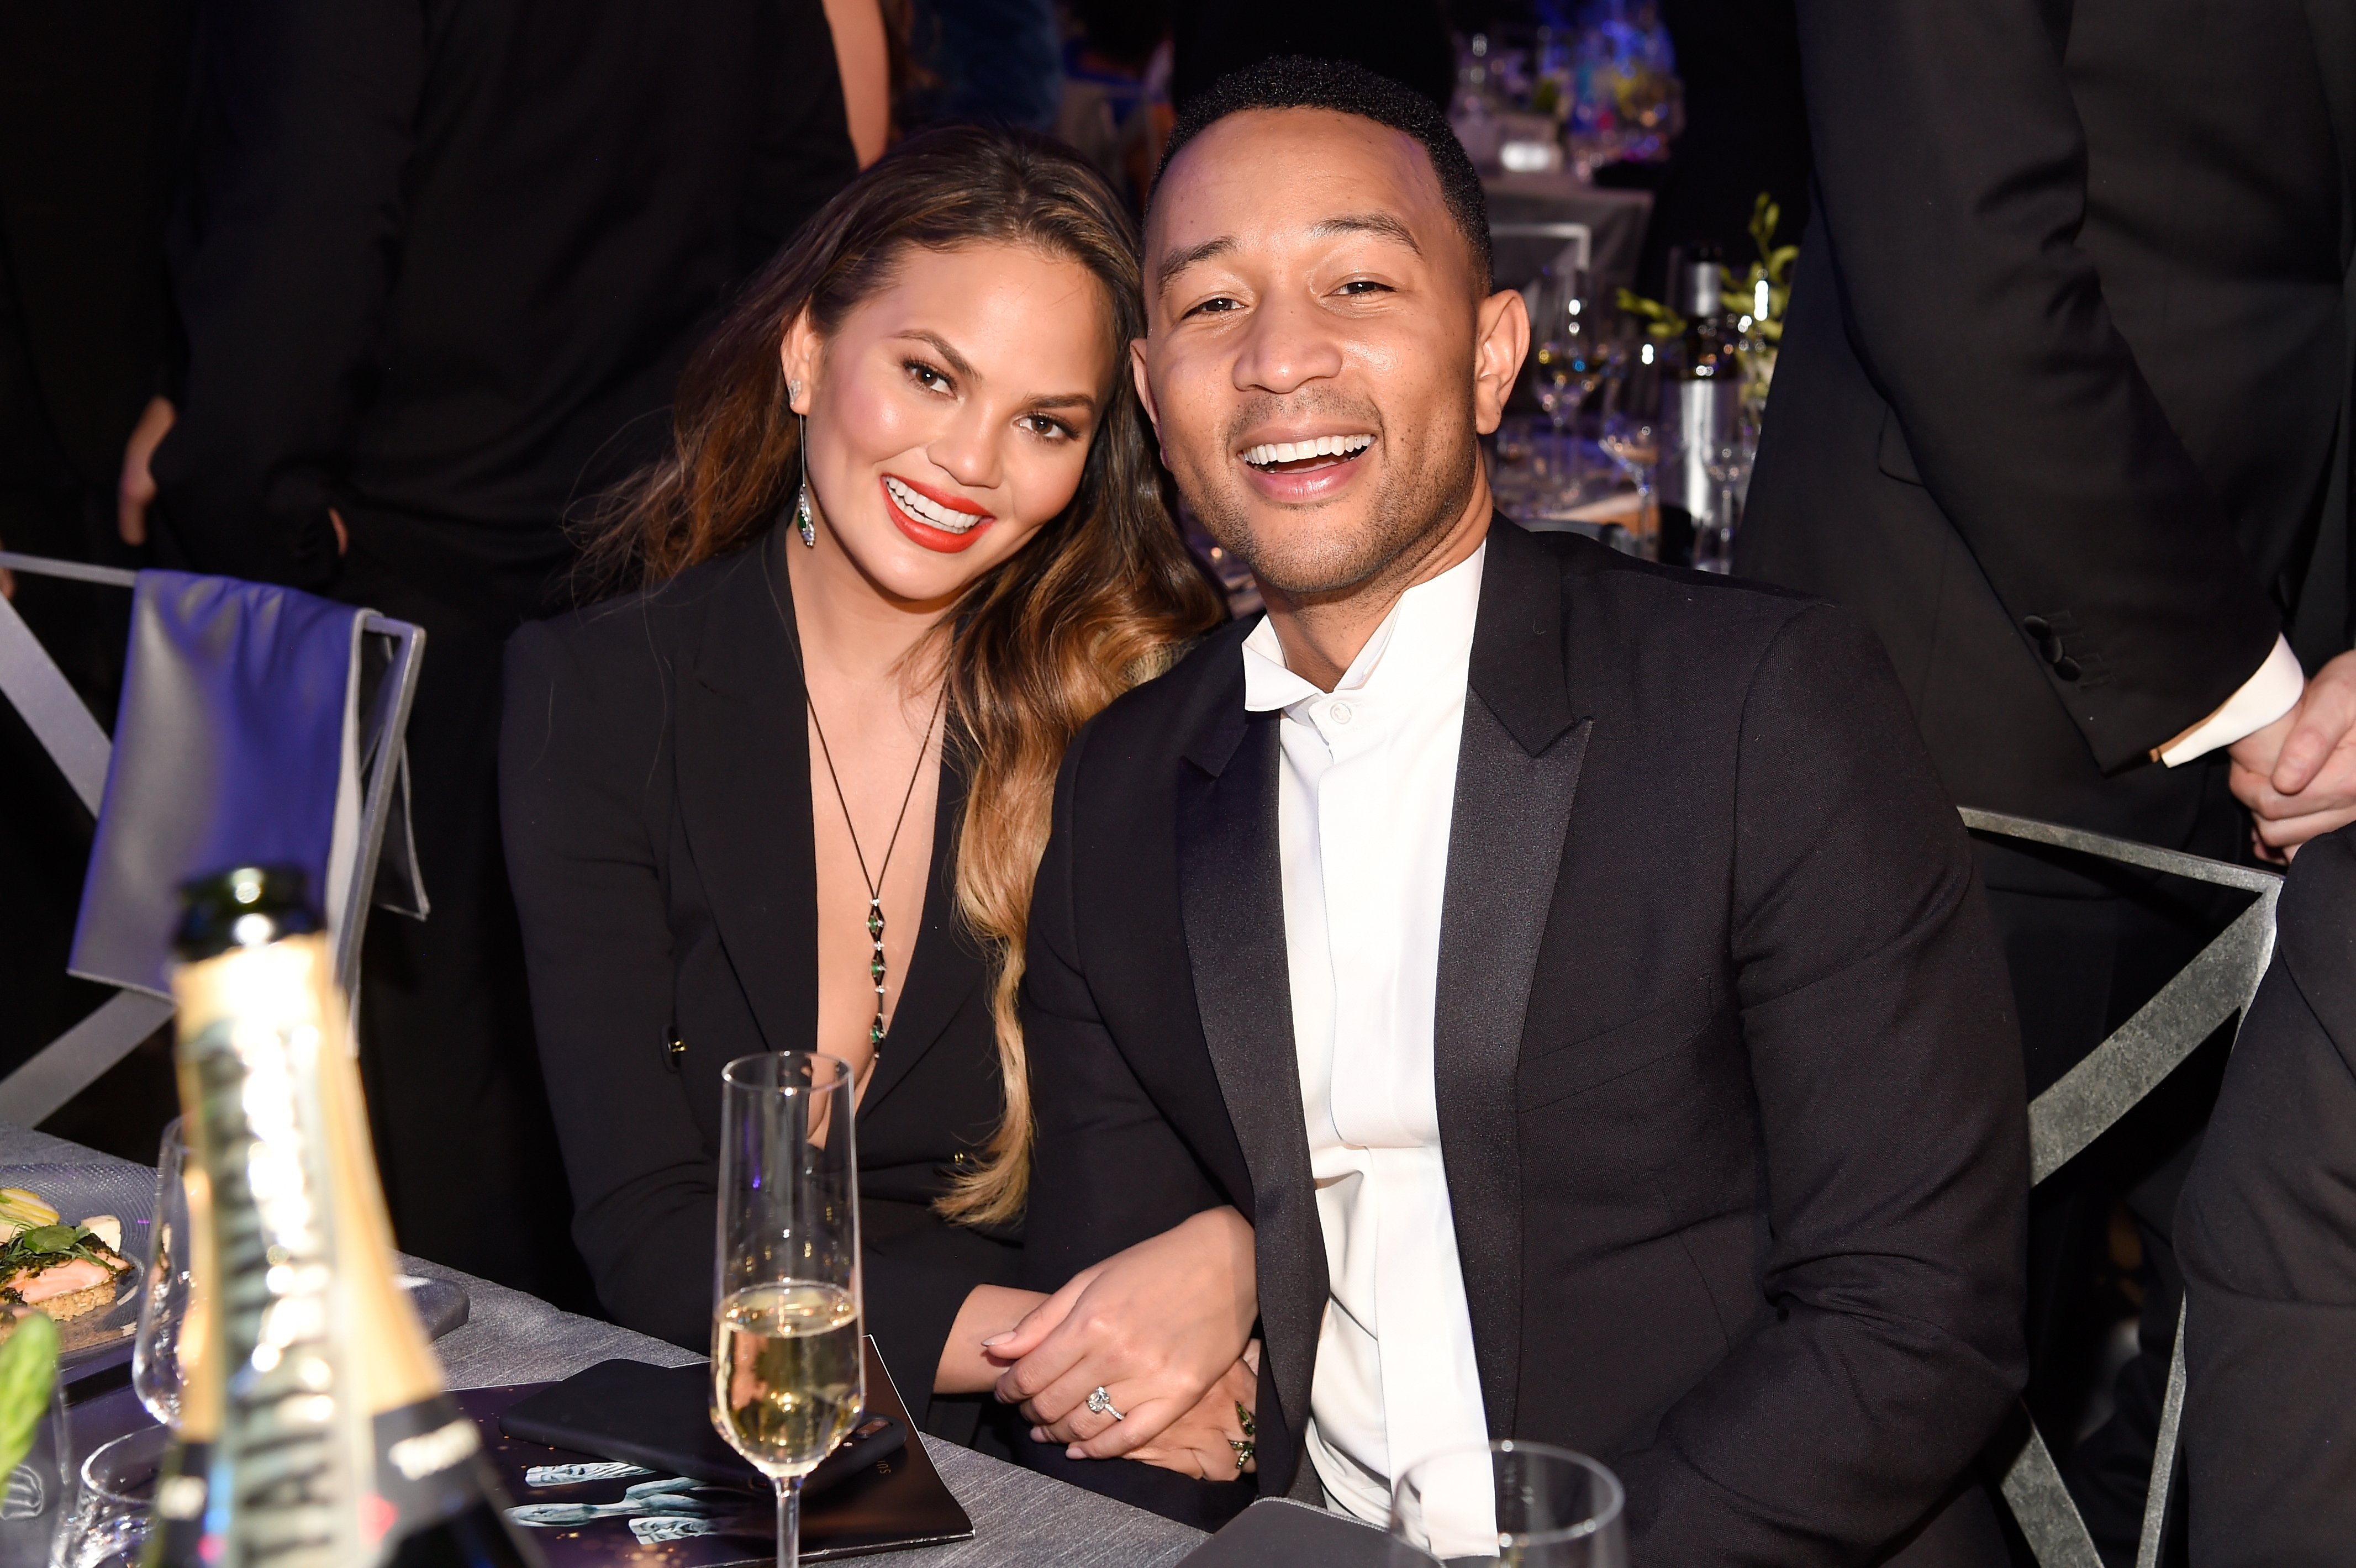 Chrissy Teigen and John Legend during The 23rd Annual Screen Actors Guild Awards at The Shrine Auditorium on January 29, 2017 | Photo: GettyImages